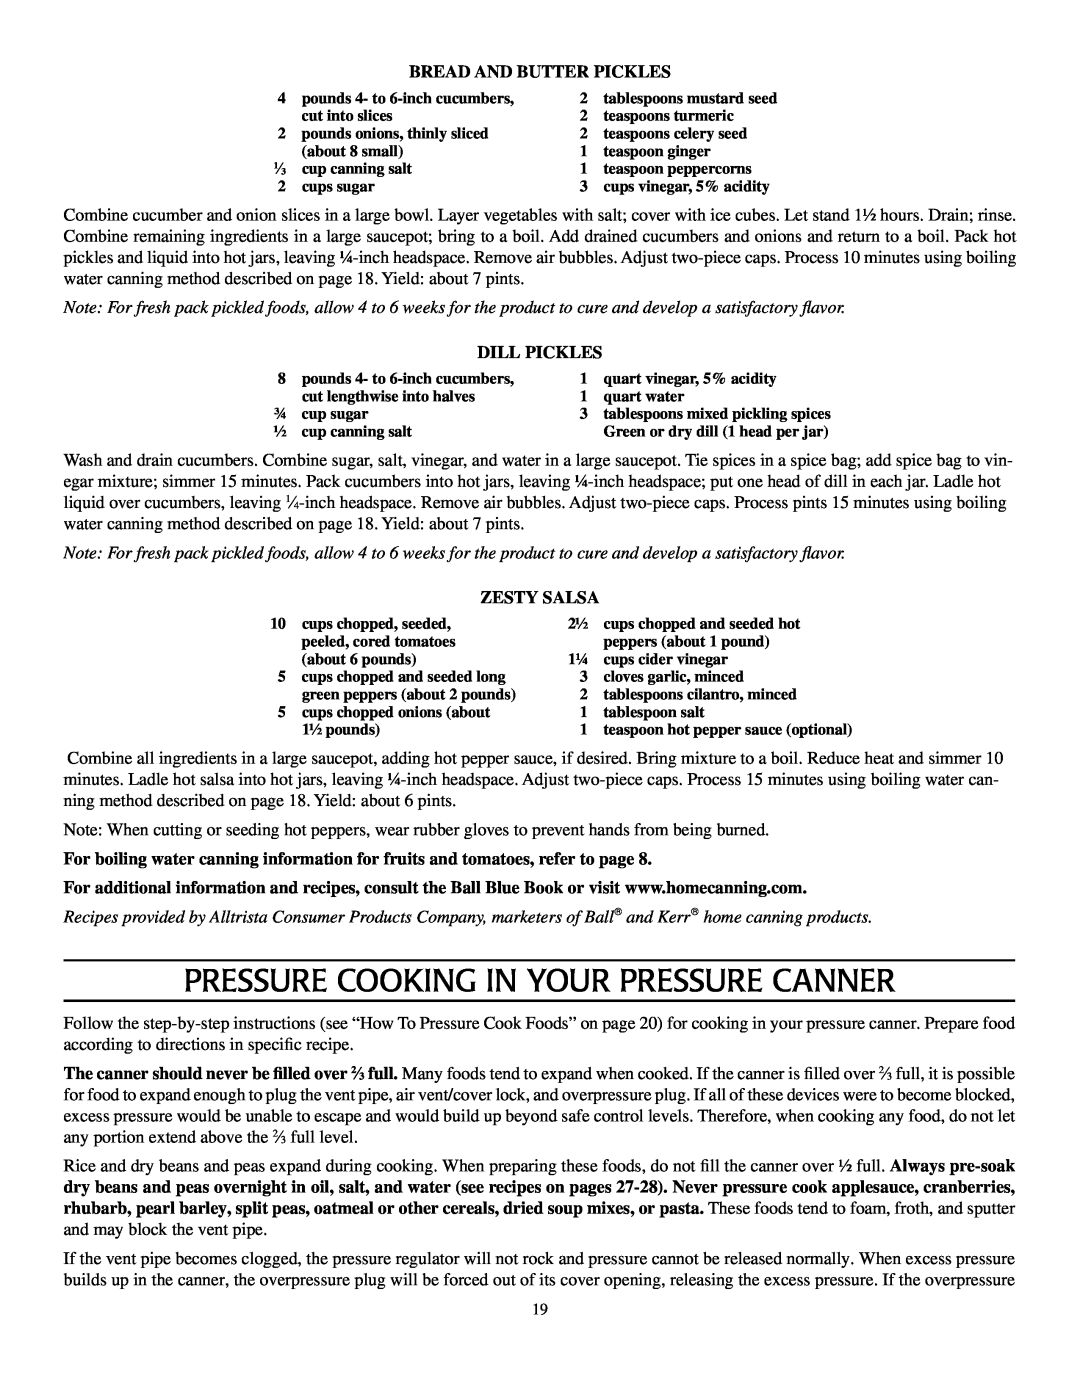 Presto Pressure Canner and Cooker warranty Pressure Cooking In Your Pressure Canner, Bread and Butter Pickles, Dill Pickles 